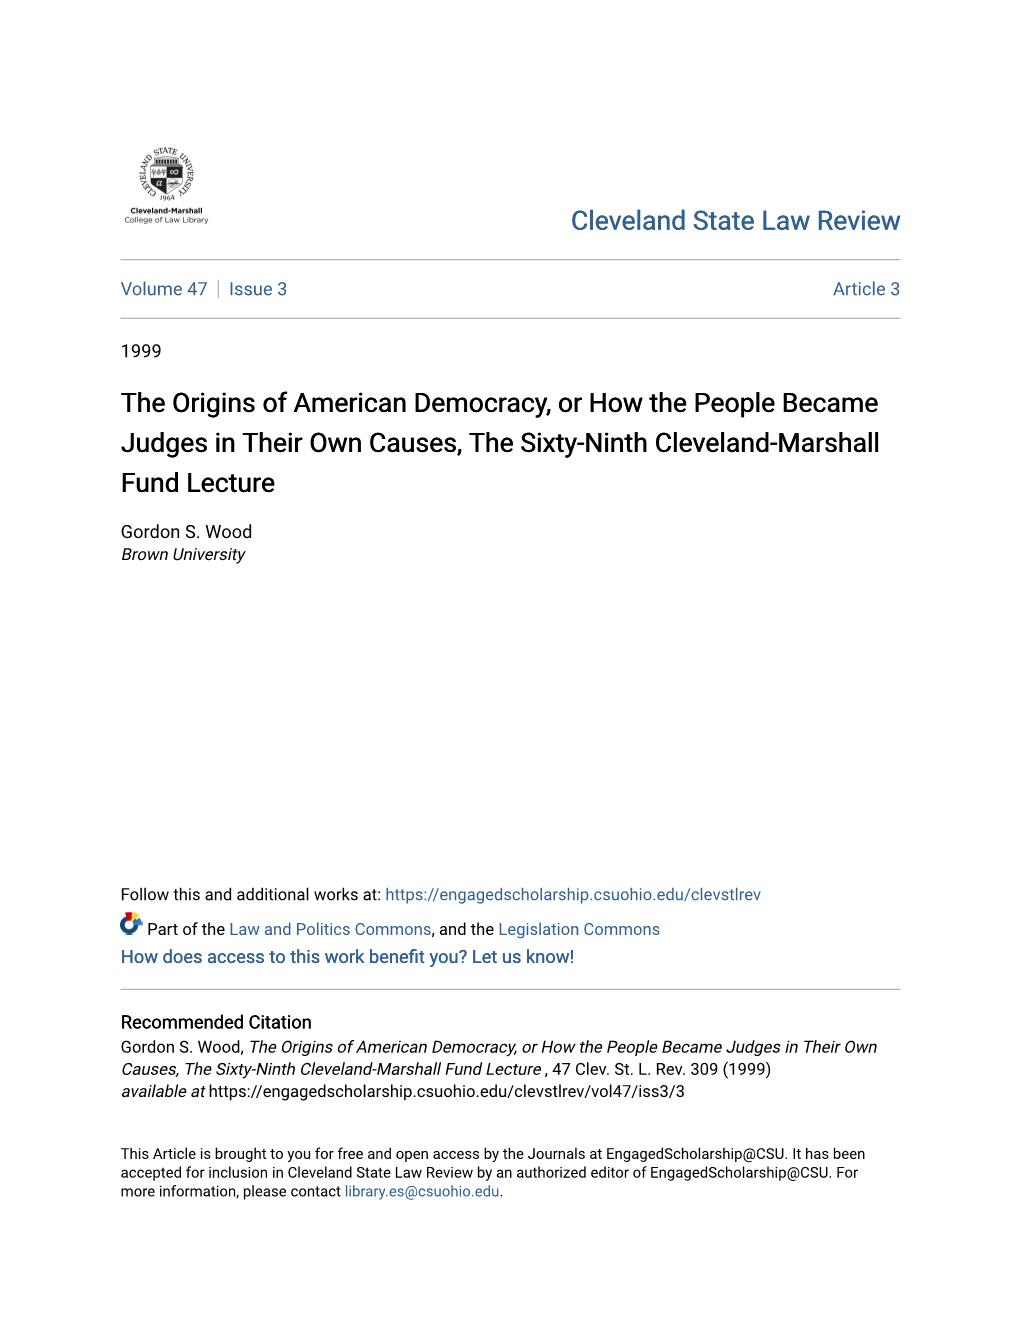 The Origins of American Democracy, Or How the People Became Judges in Their Own Causes, the Sixty-Ninth Cleveland-Marshall Fund Lecture